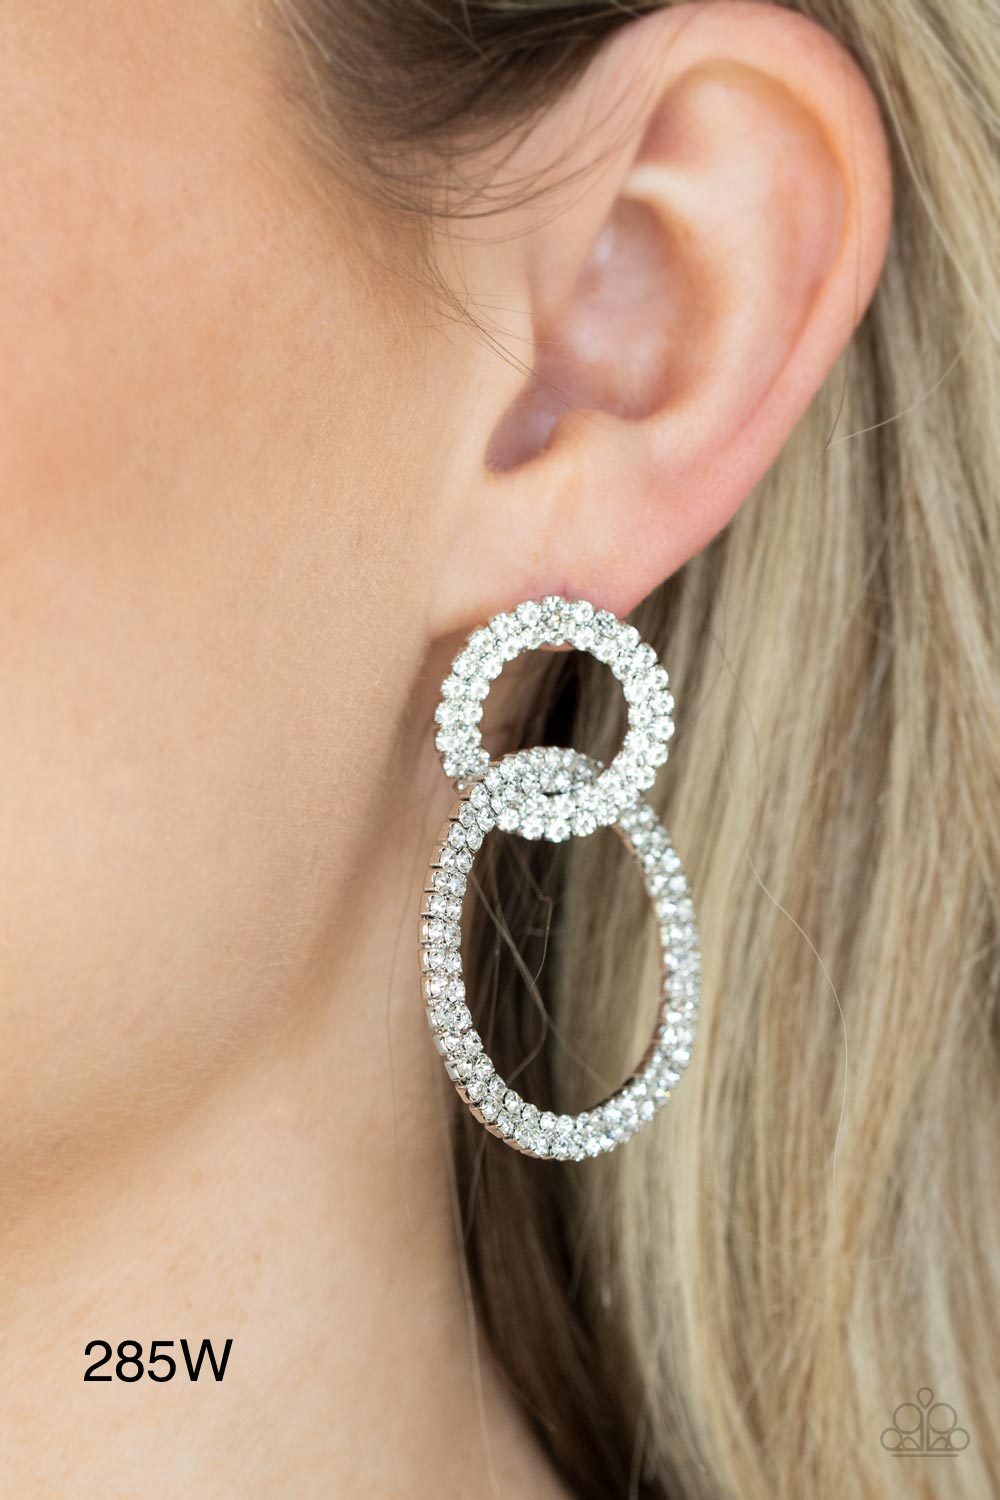 Paparazzi “Intensely Icy” White Post Earrings